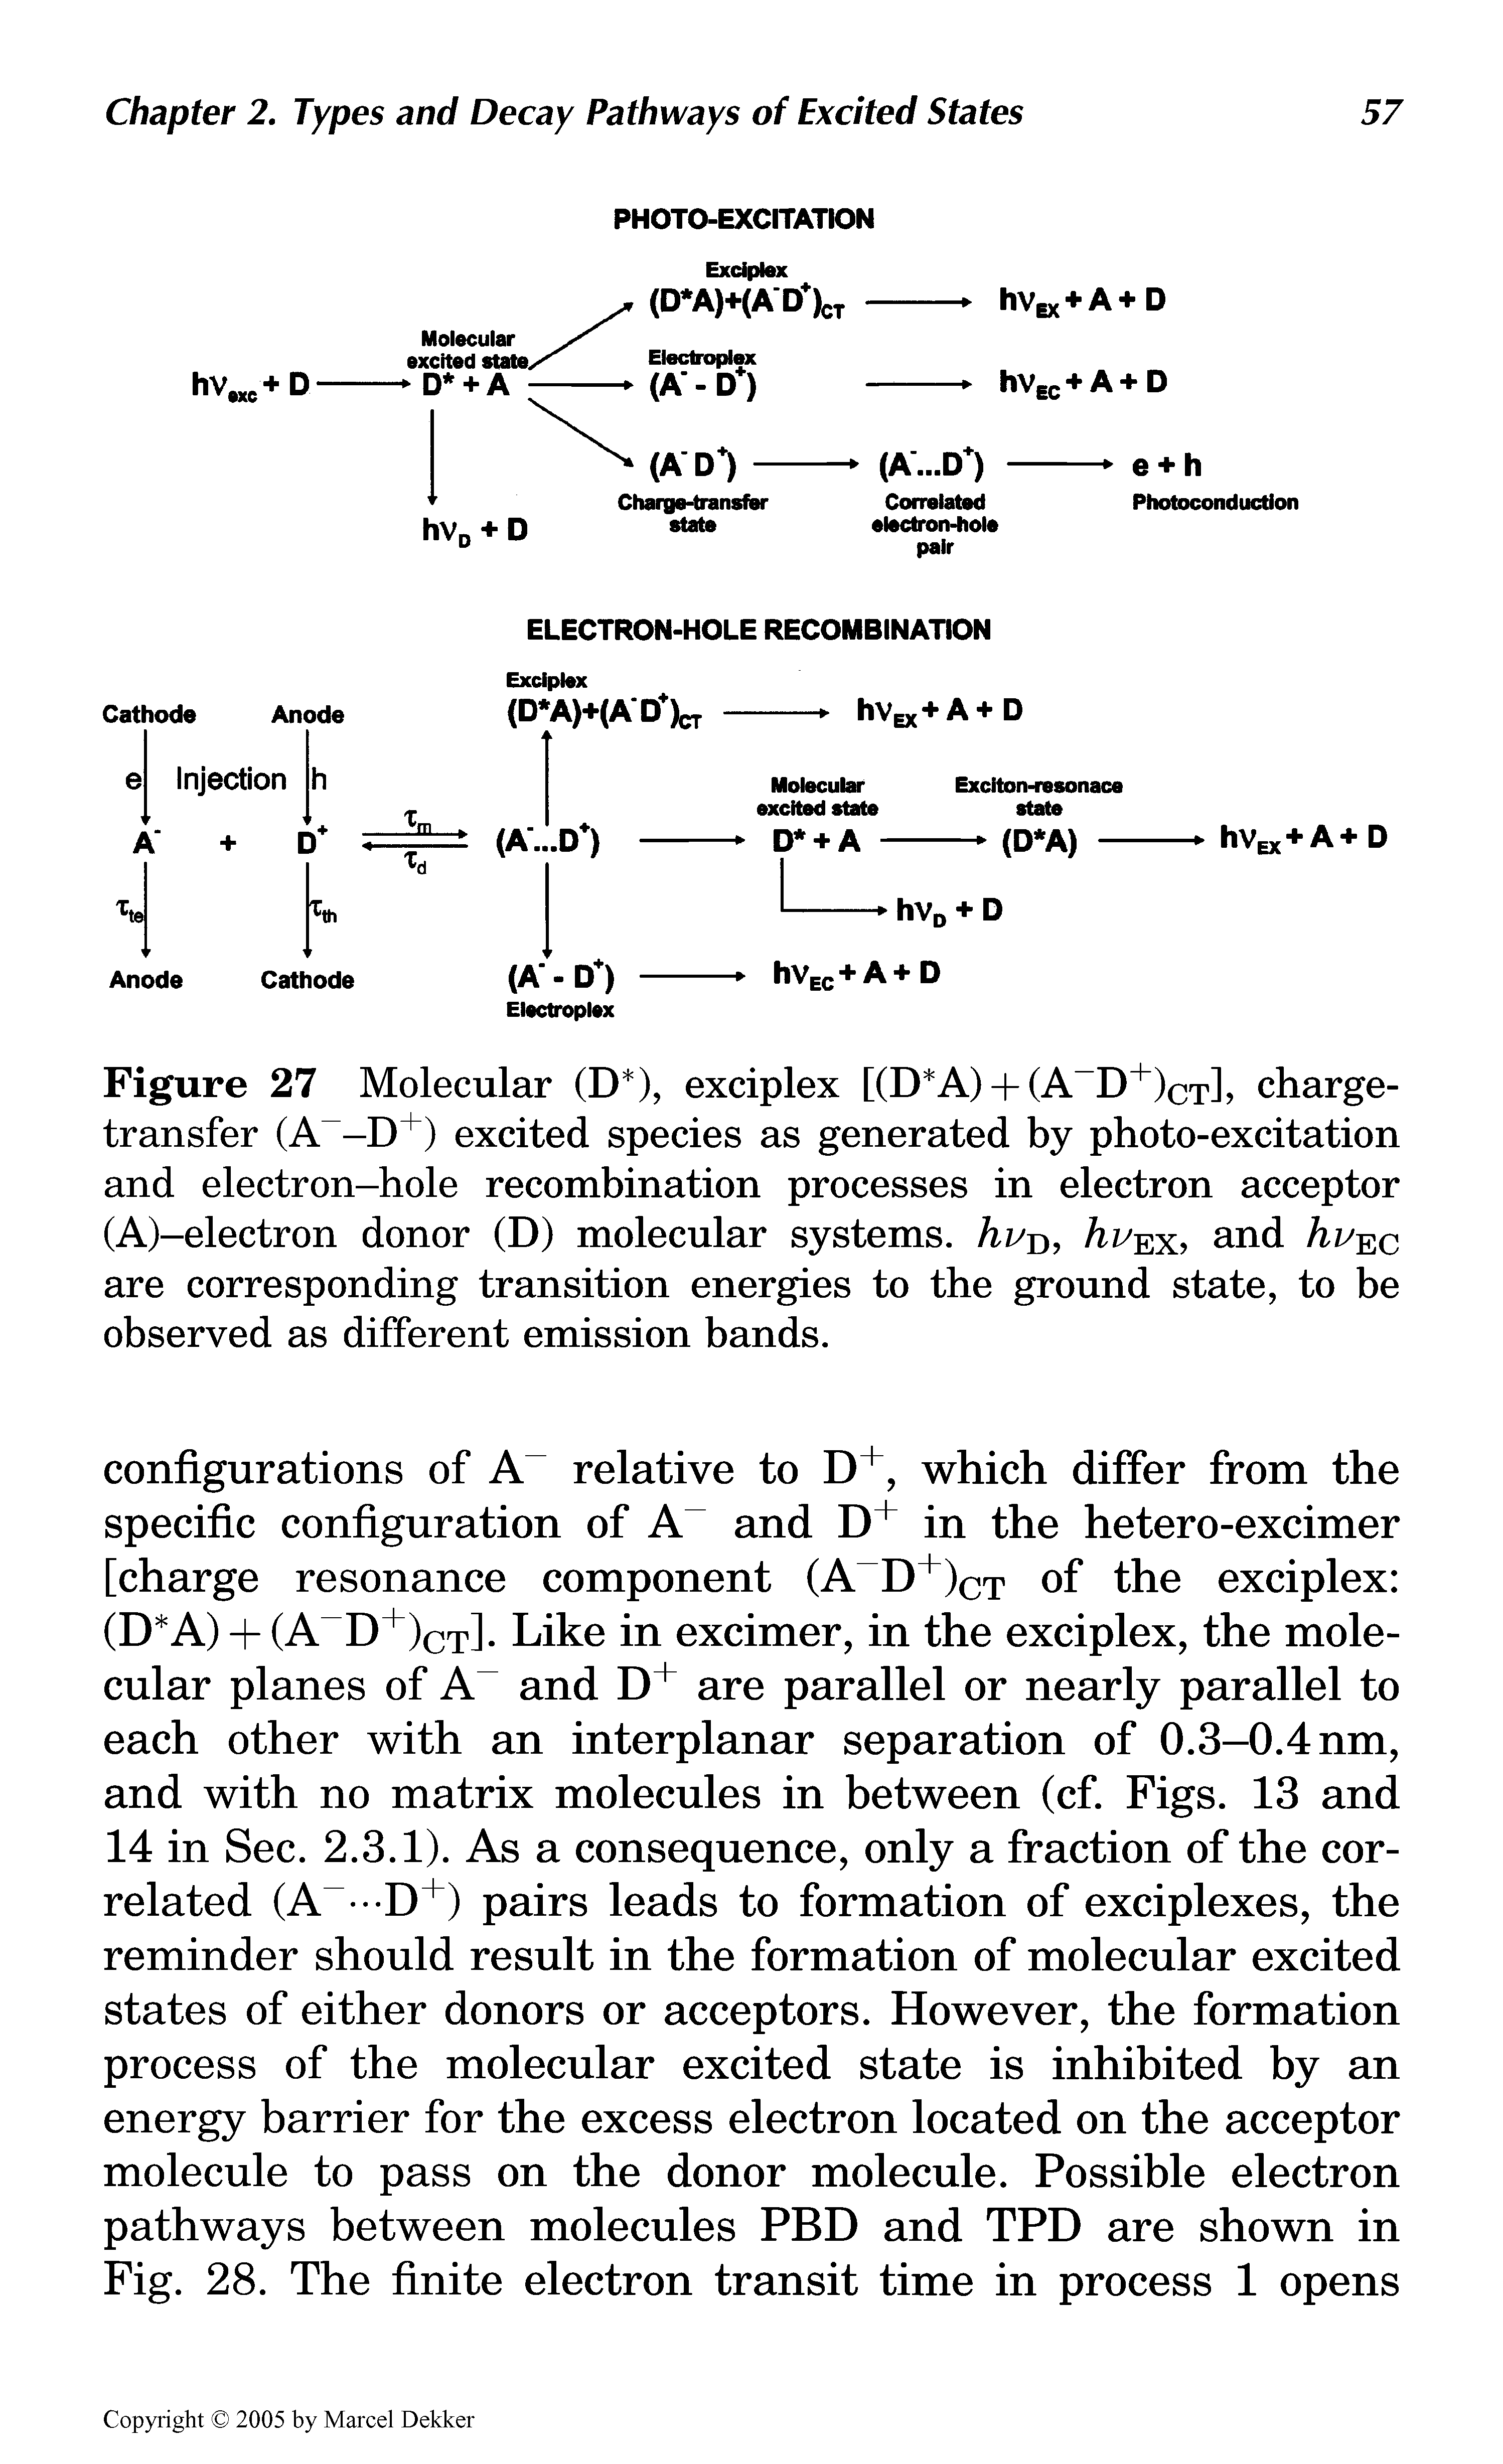 Figure 27 Molecular (D ), exciplex [(DA) — (A D )( T], charge-transfer (A -D+) excited species as generated by photo-excitation and electron-hole recombination processes in electron acceptor (A)-electron donor (D) molecular systems, hvD, hvEx, and hvEc are corresponding transition energies to the ground state, to be observed as different emission bands.